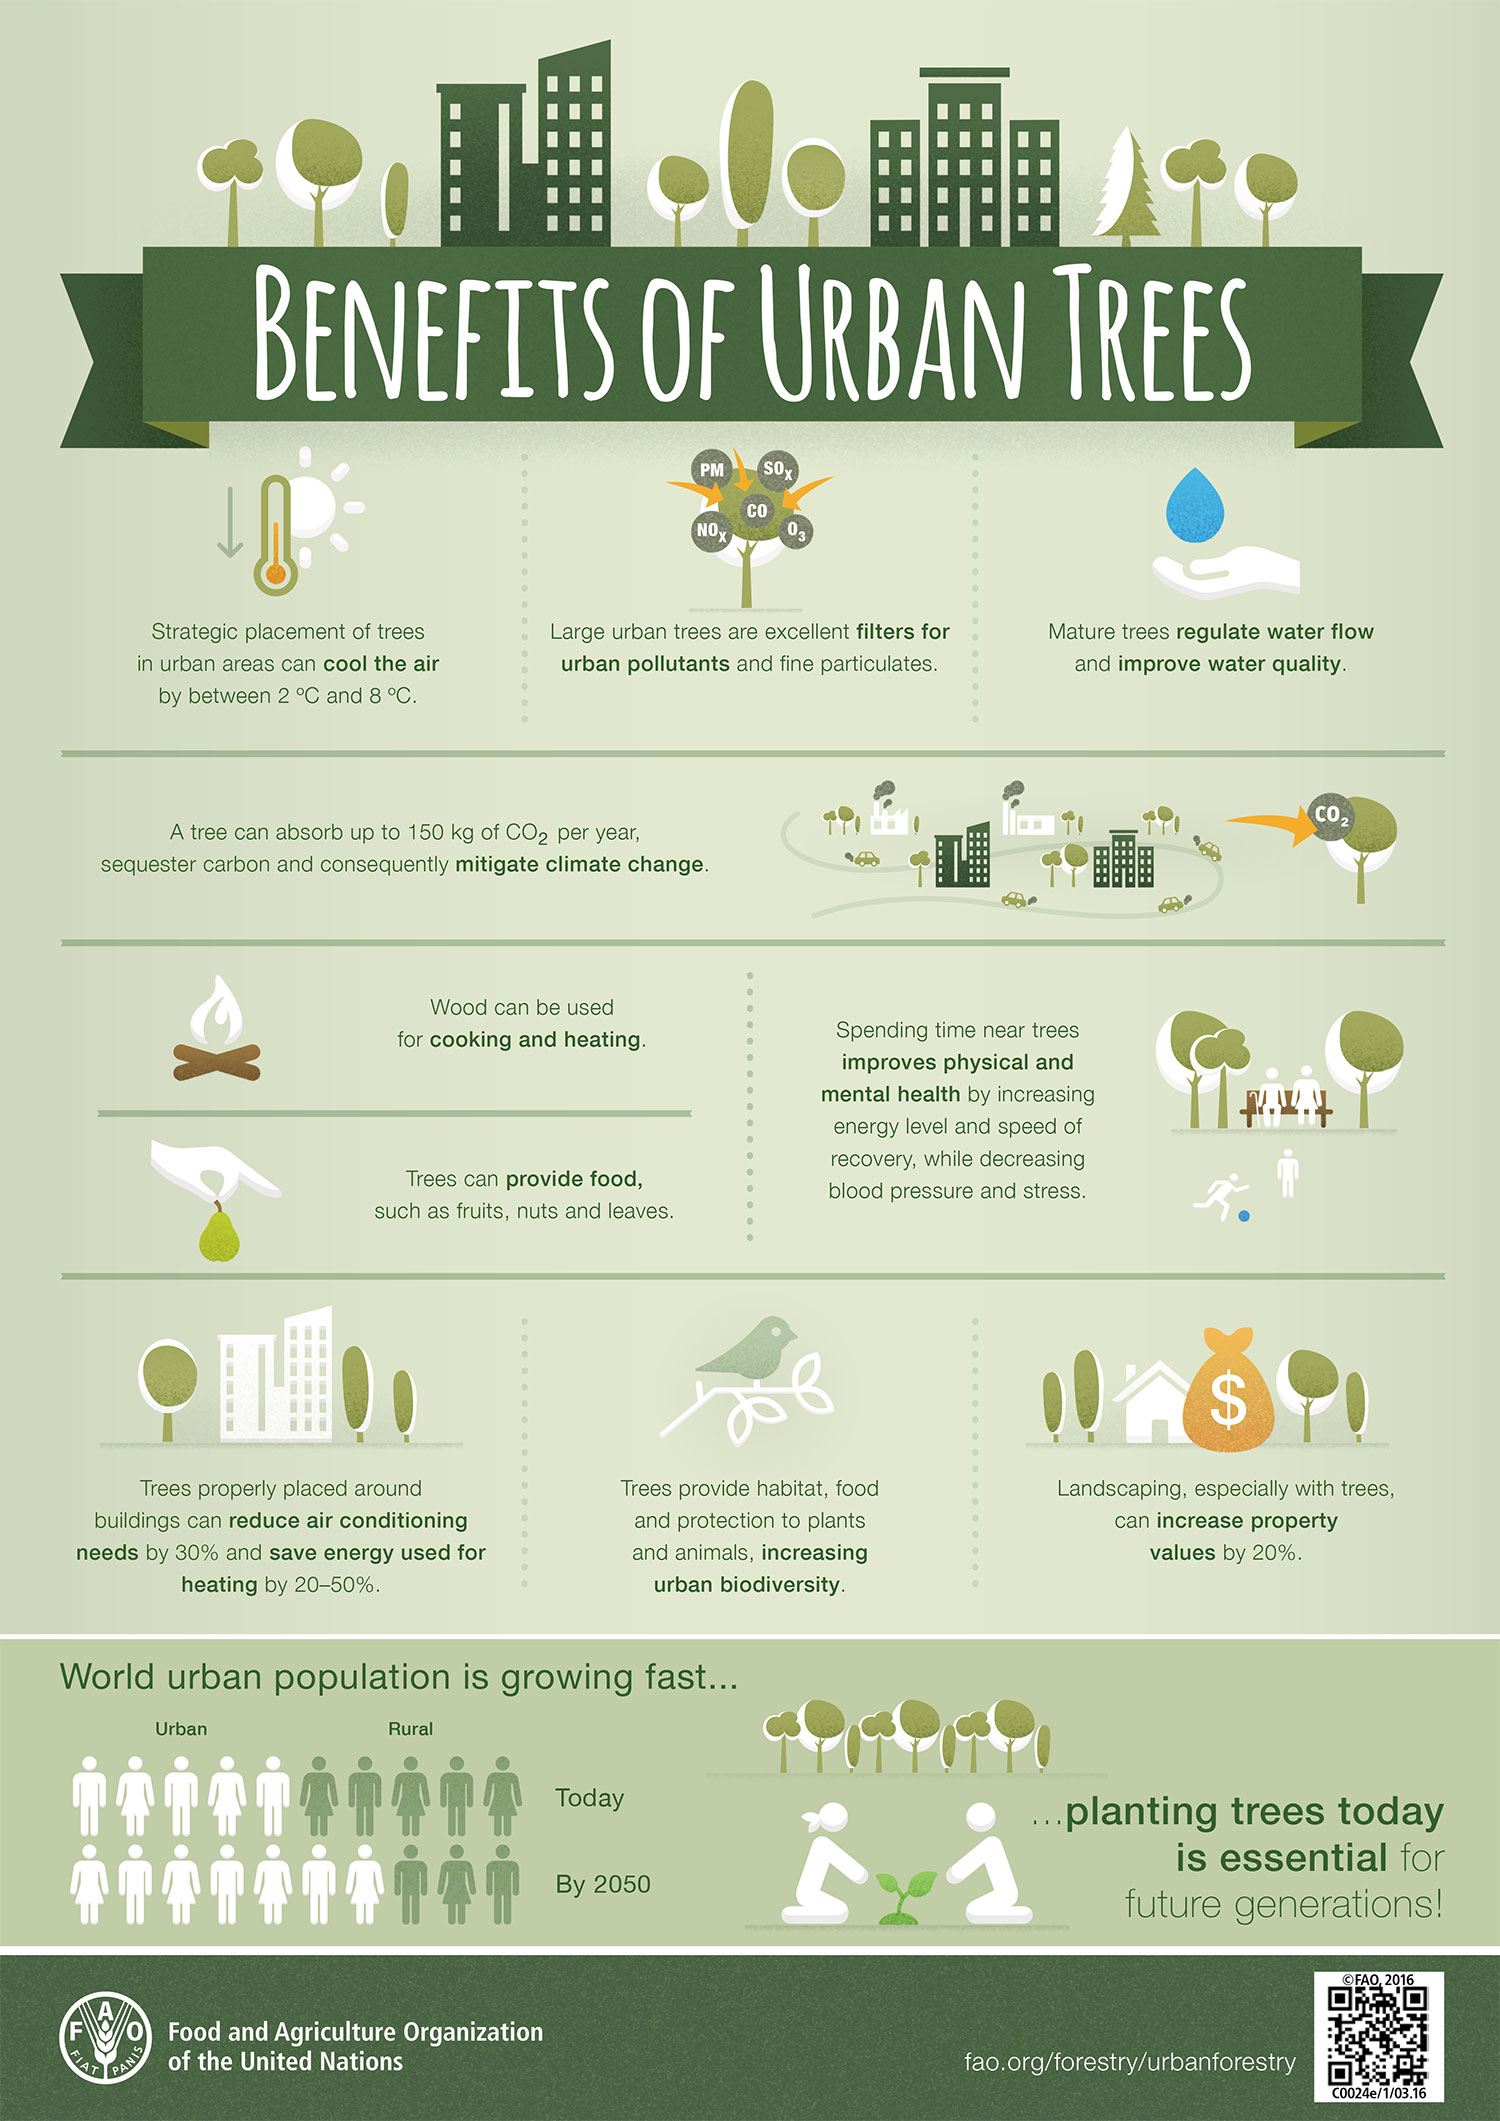 An infographic depicting the benefits of urban trees